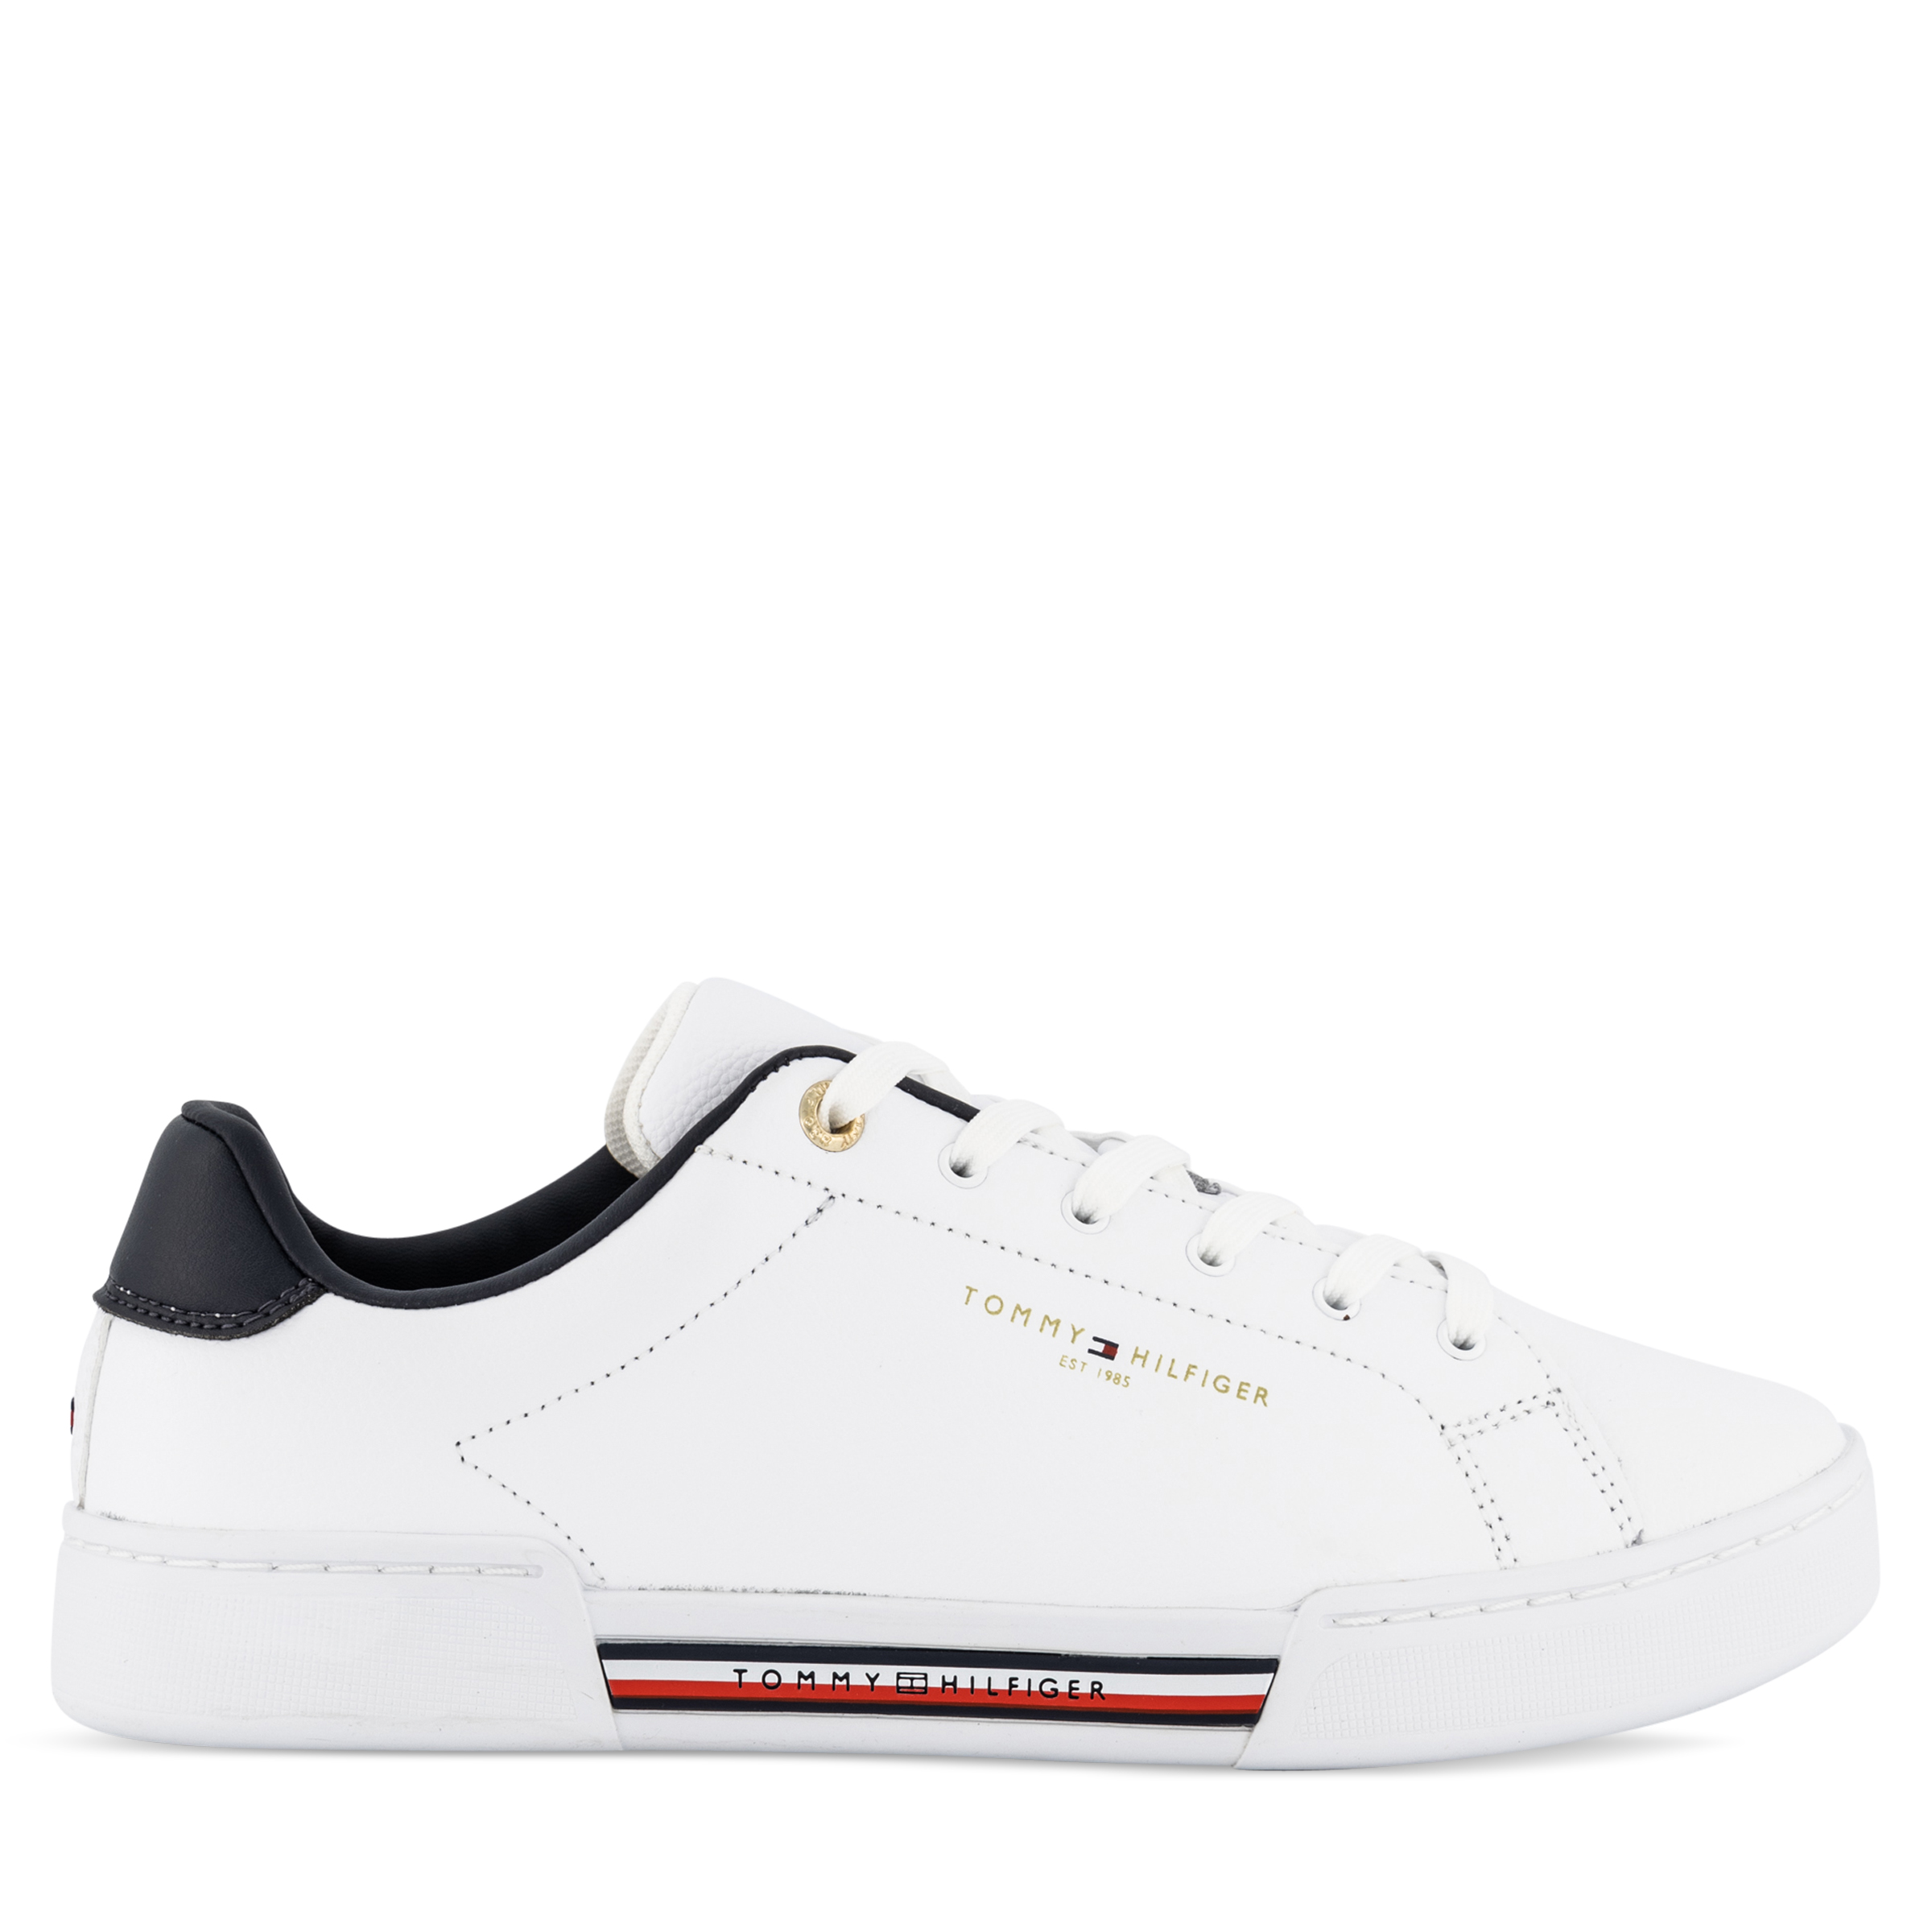 Tommy Hilfiger Shoes | Shop all the new styles | Boozt.com